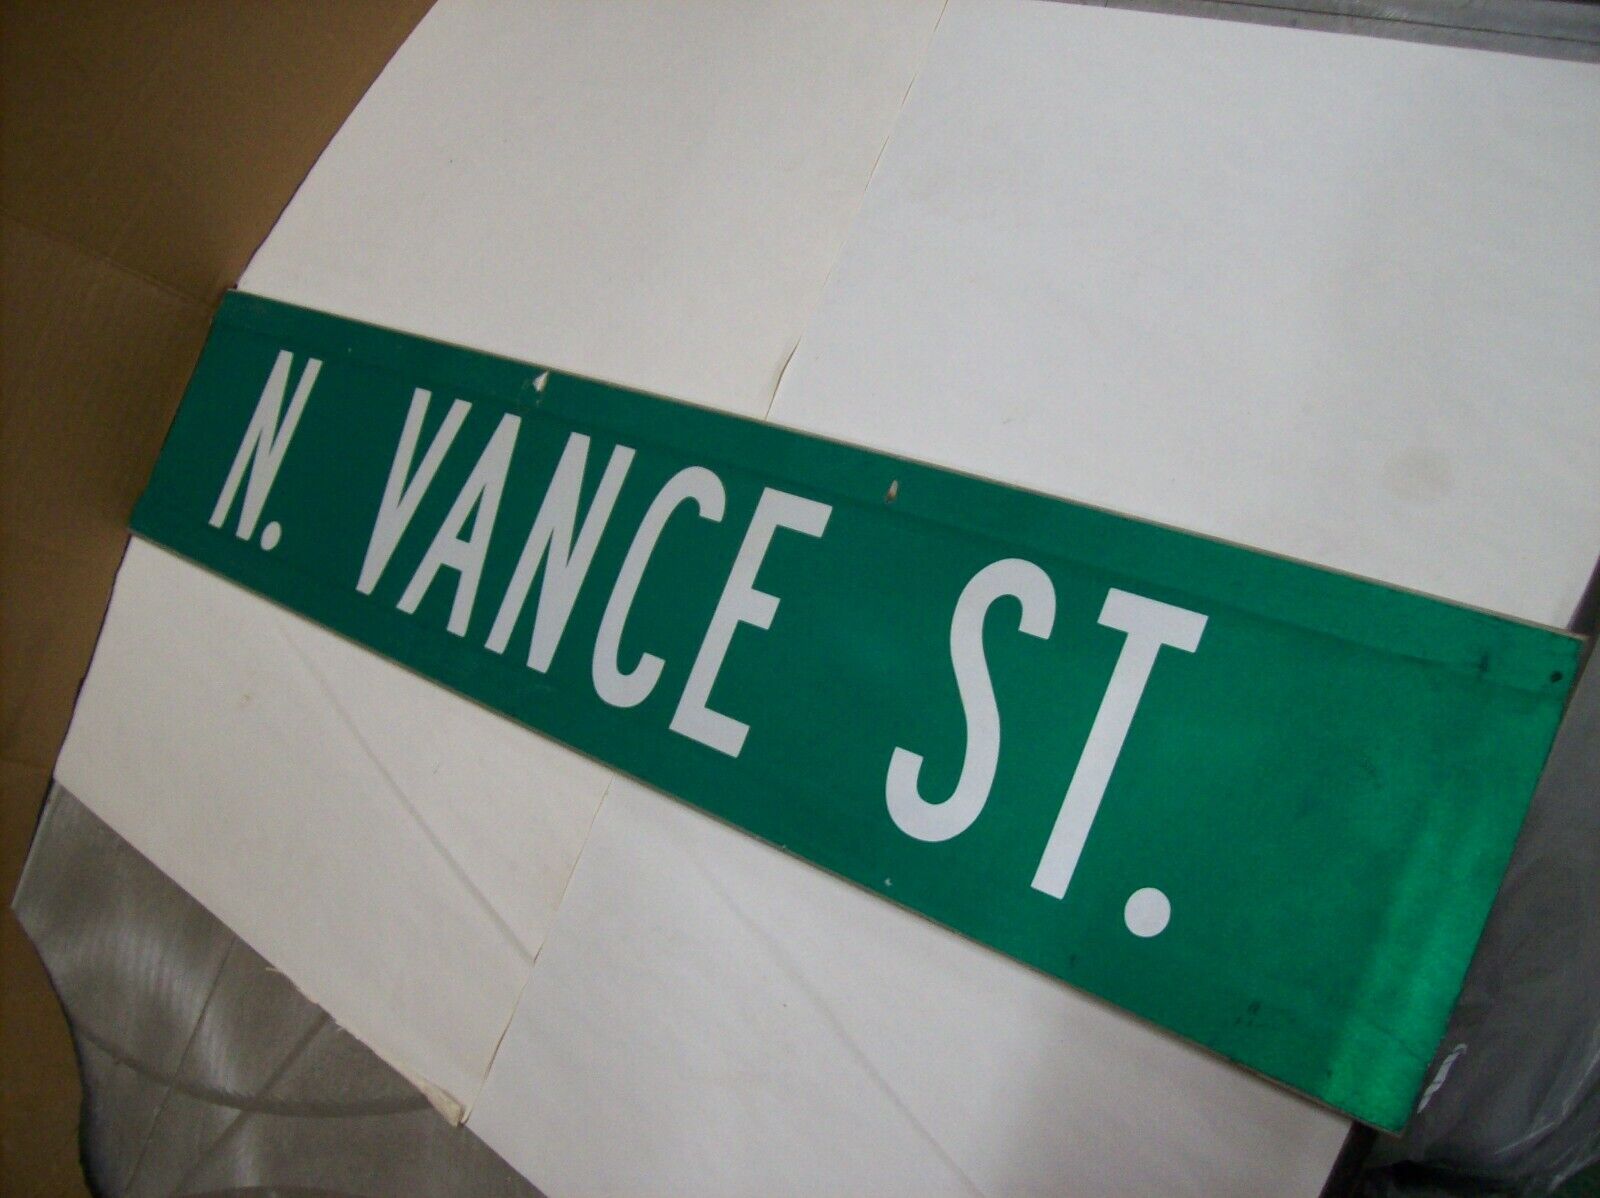 Genuine Authentic NEW Street Sign - N. VANCE ST.